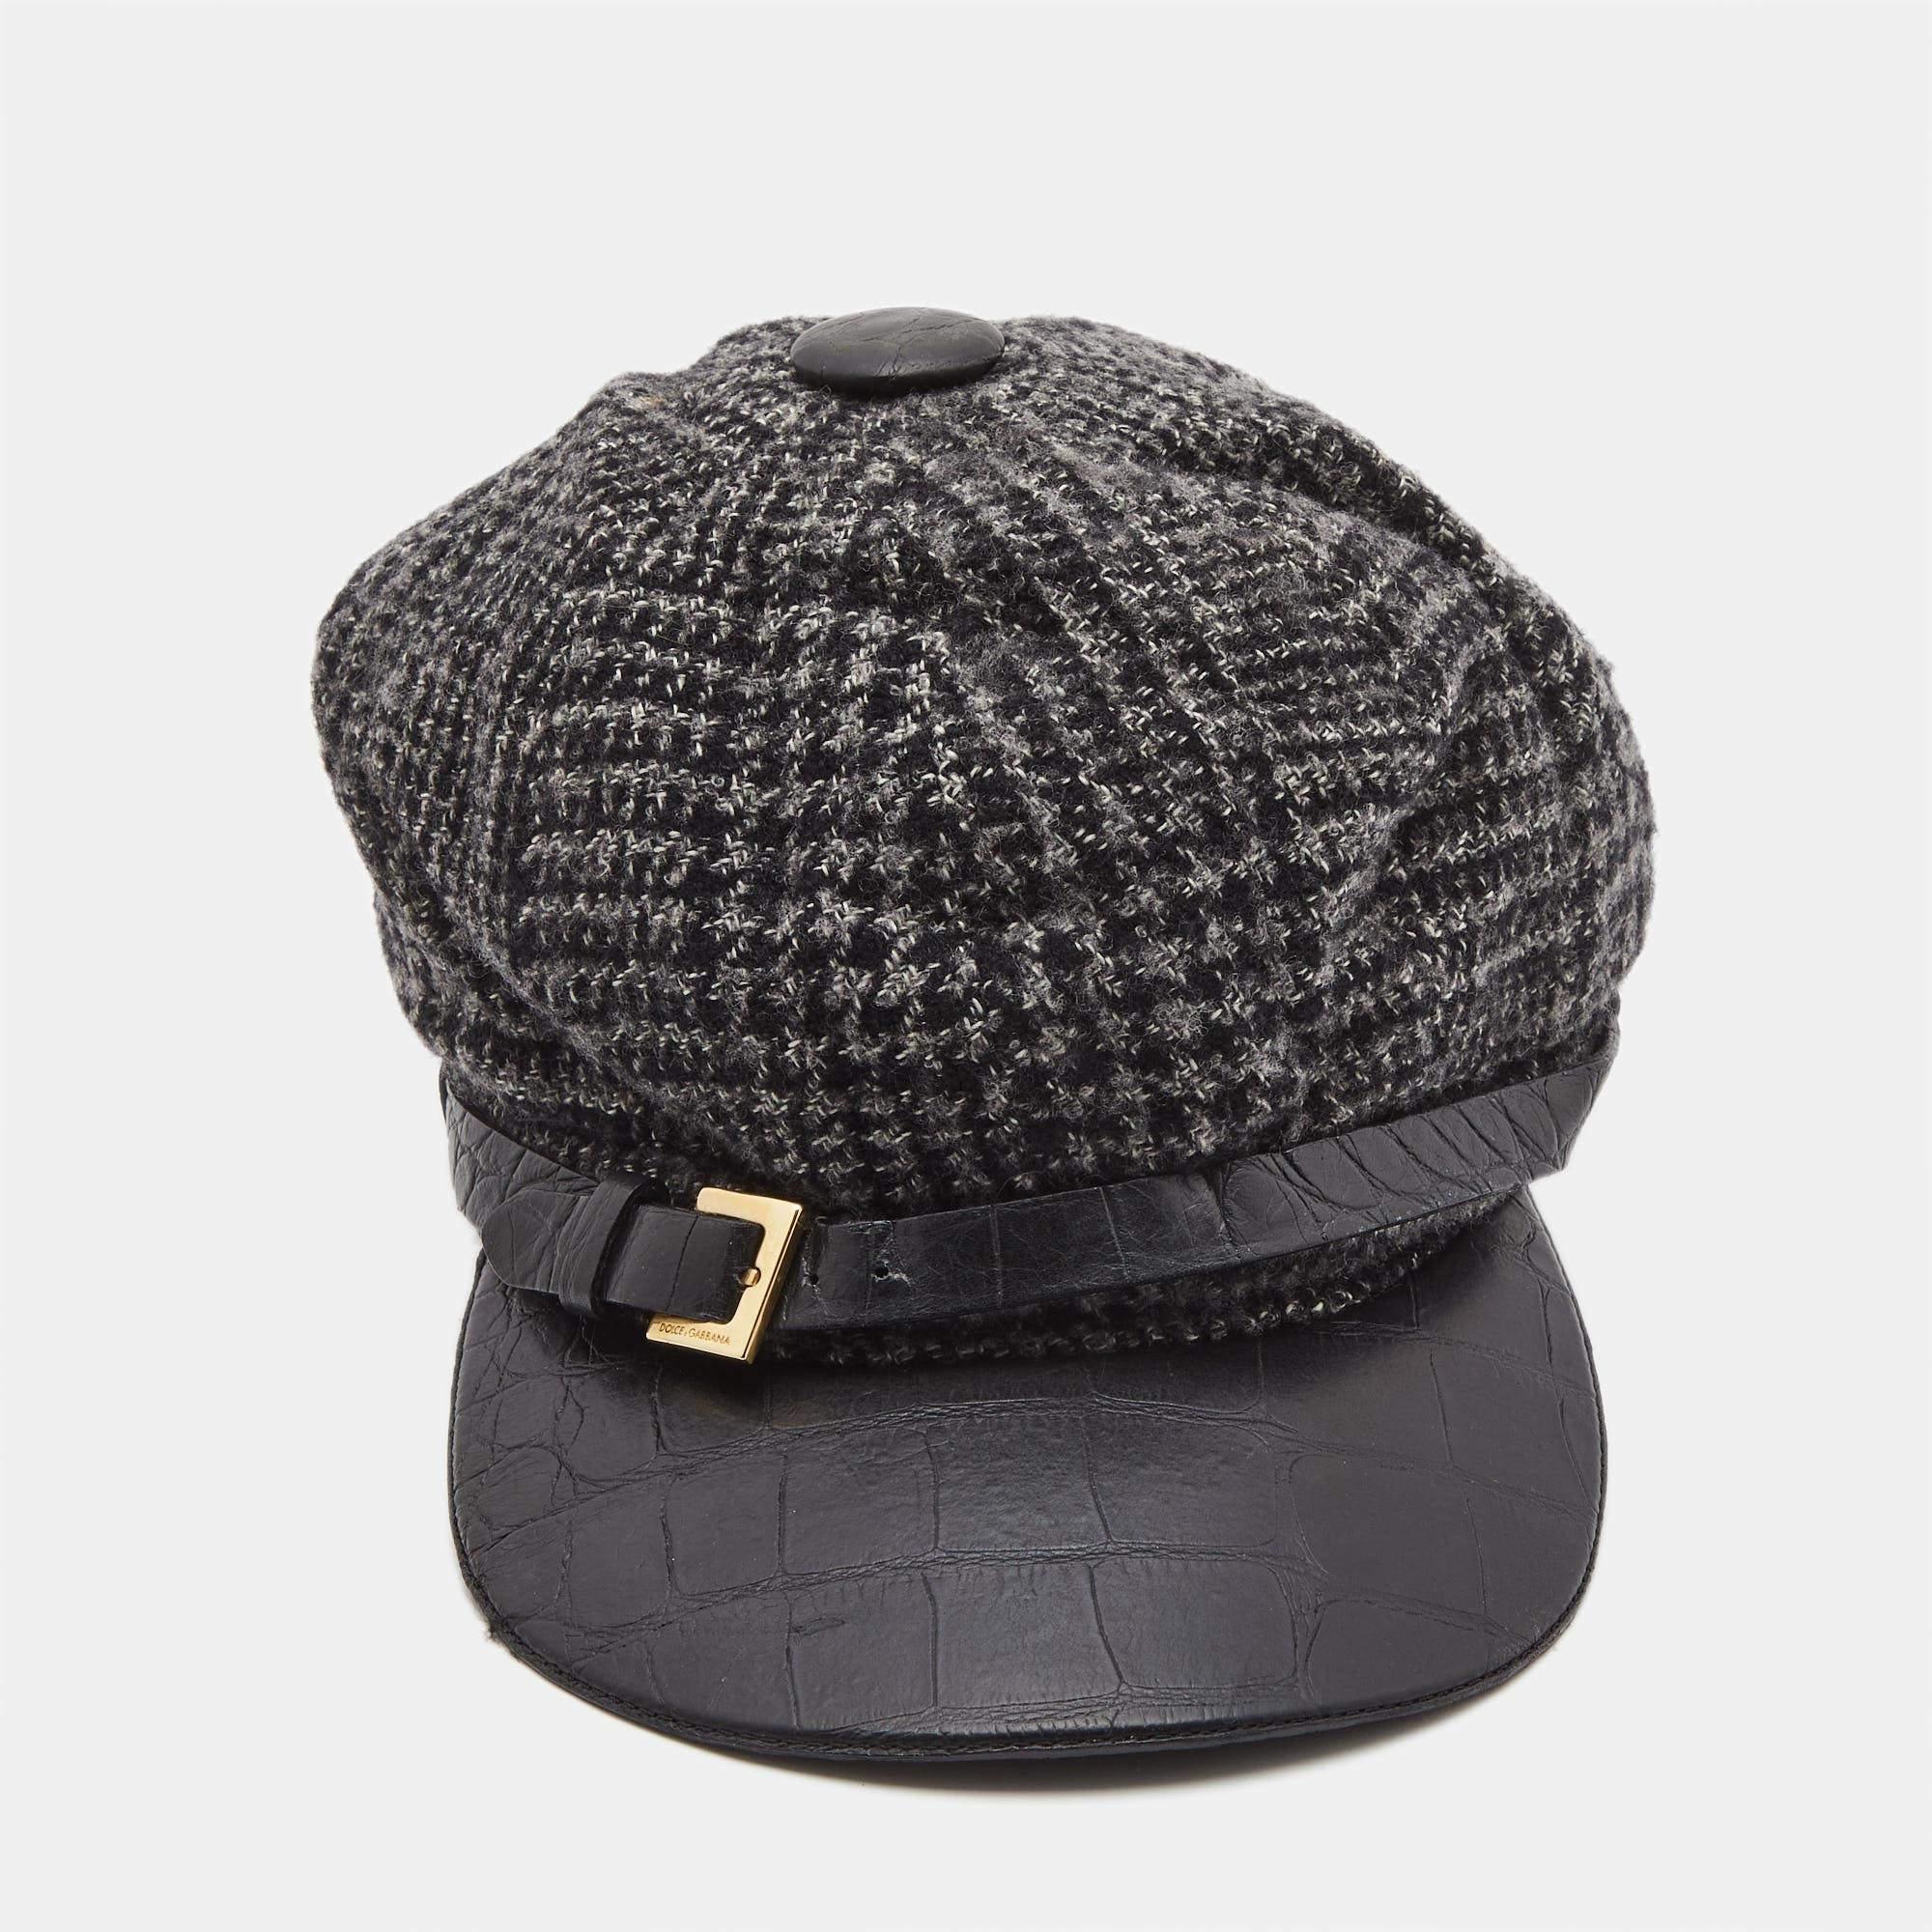 Dolce & Gabbana Black Wool Knit Croc Embossed Leather Baseball Cap Size 57 For Sale 3